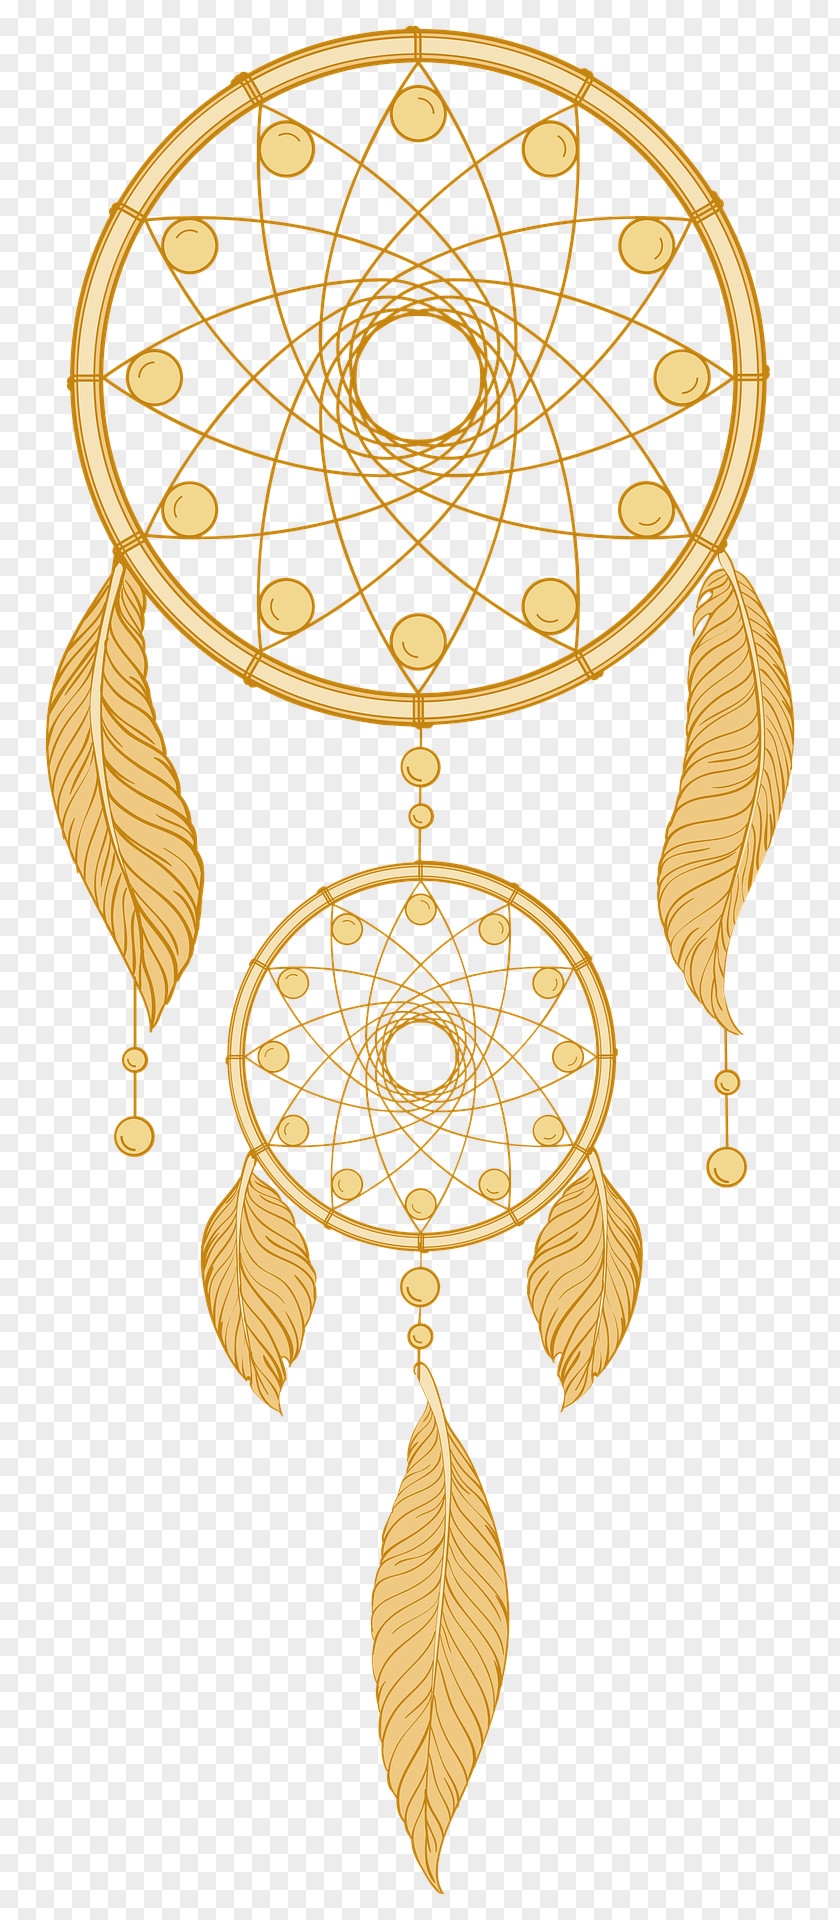 Dreamcatcher Native Americans In The United States Hinduism Medicine Wheel PNG